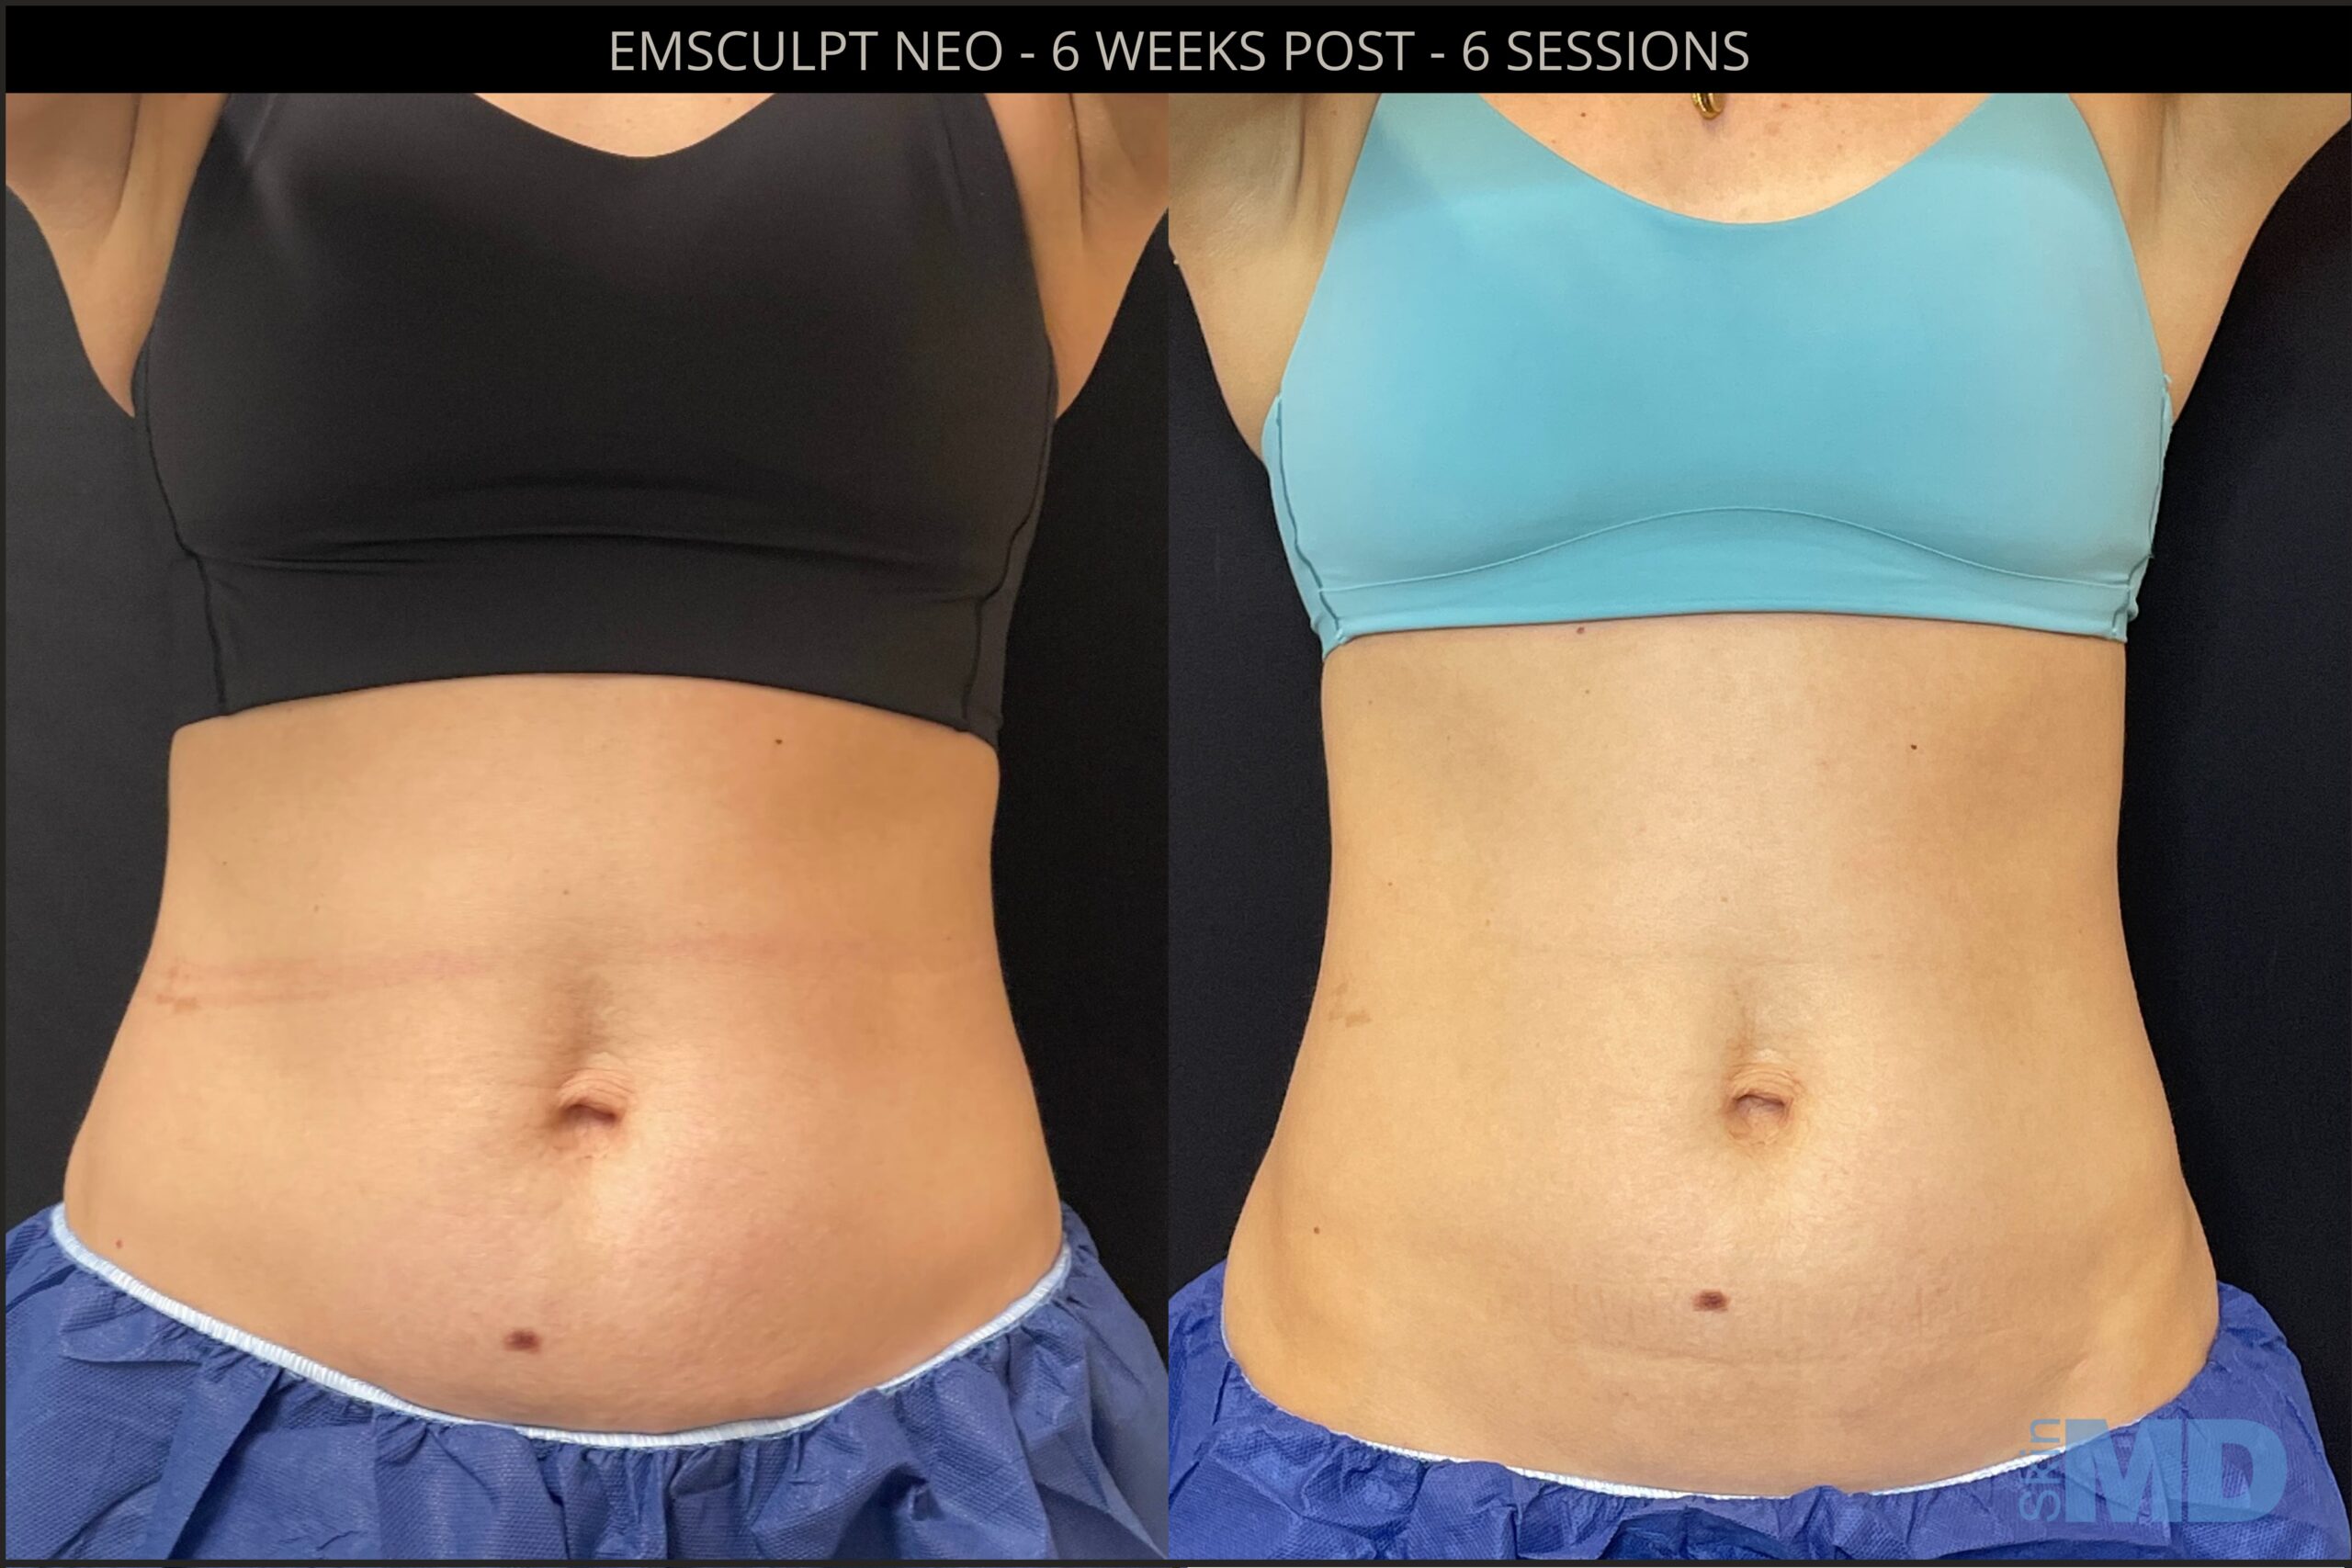 Before and after Emsculpt NEO results